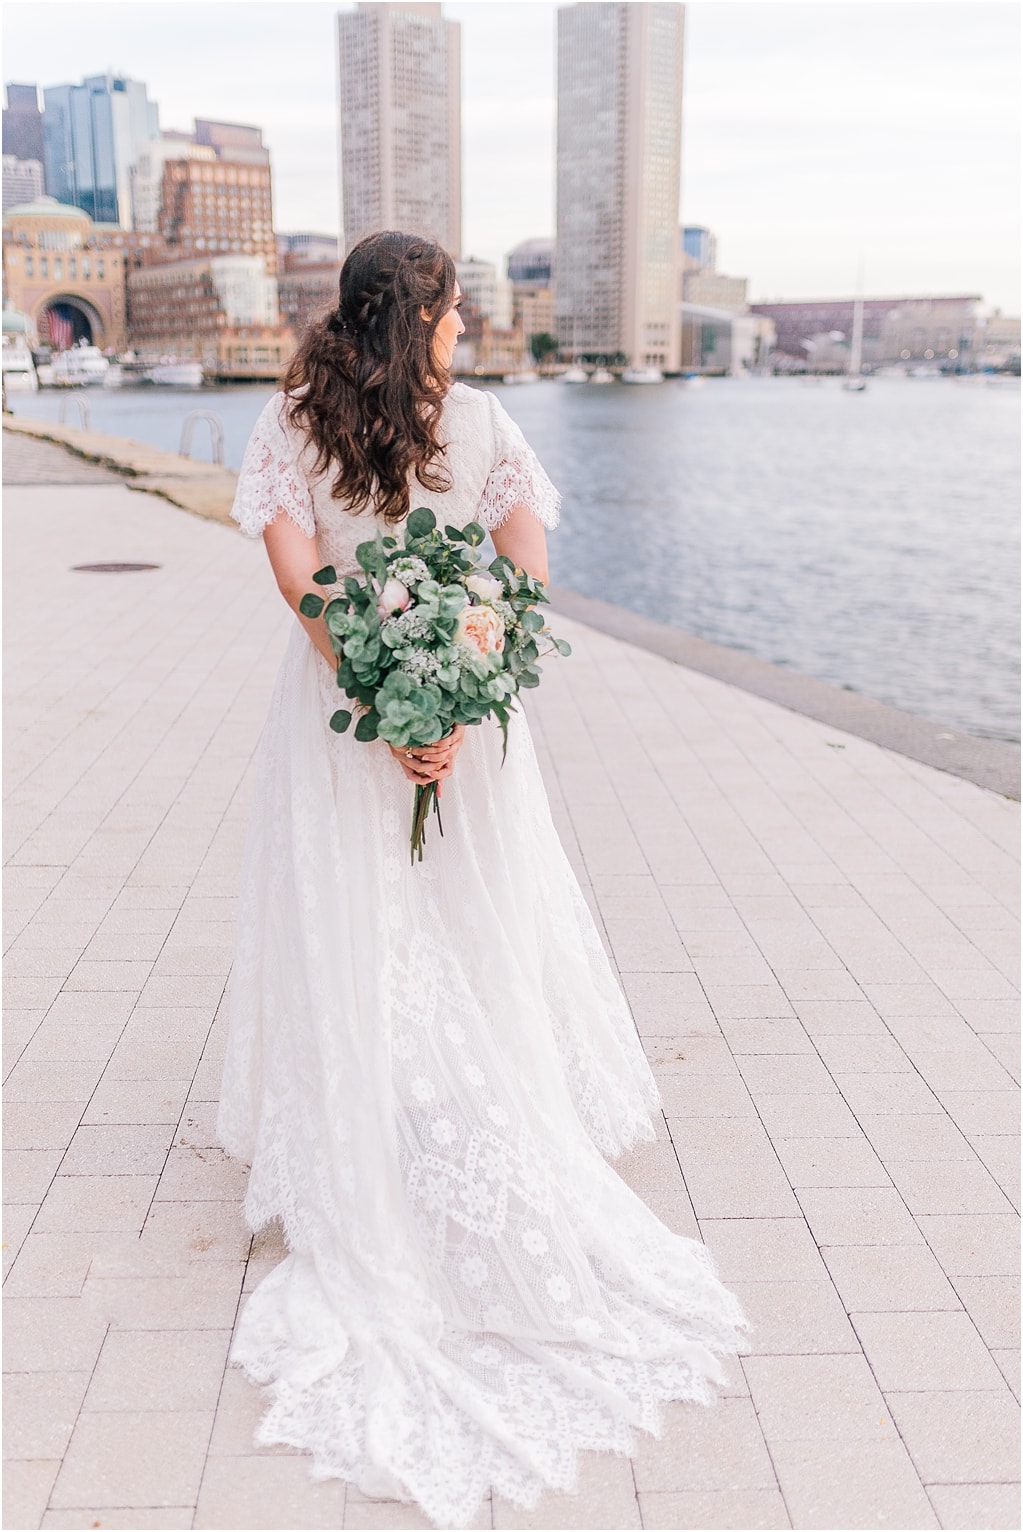 the backside of the bride holding the wedding bouquet behind her while she looks out at the water